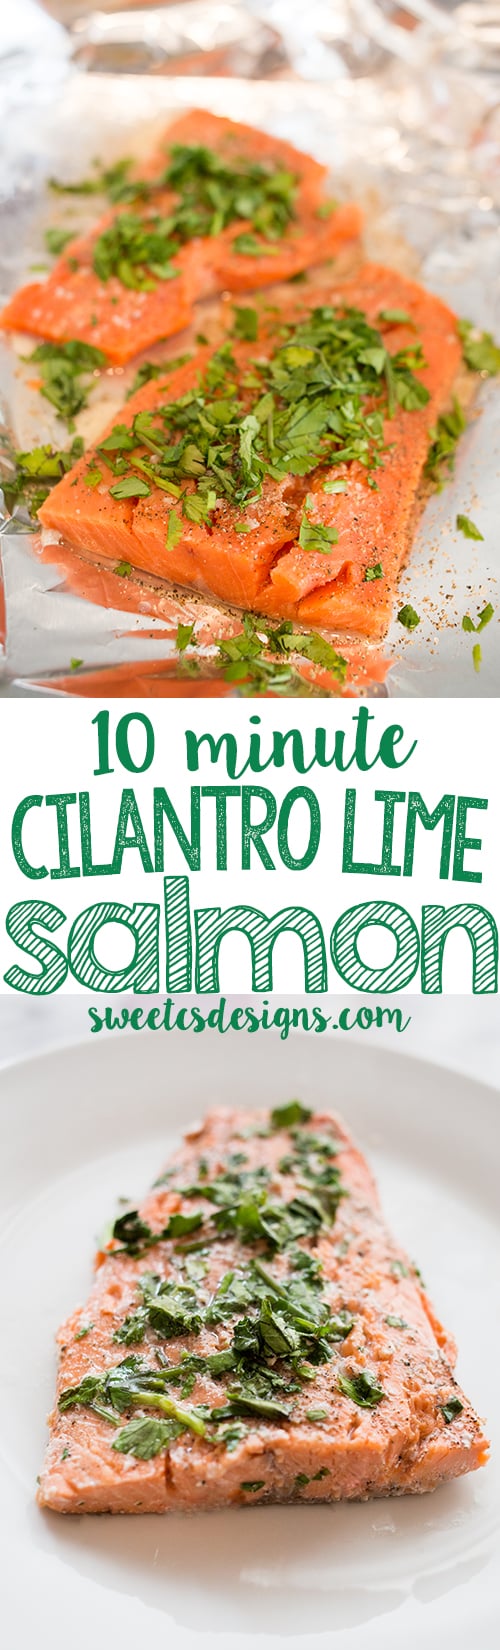 10 Minute Cilantro Lime Salmon- this is so delicious, quick and easy!